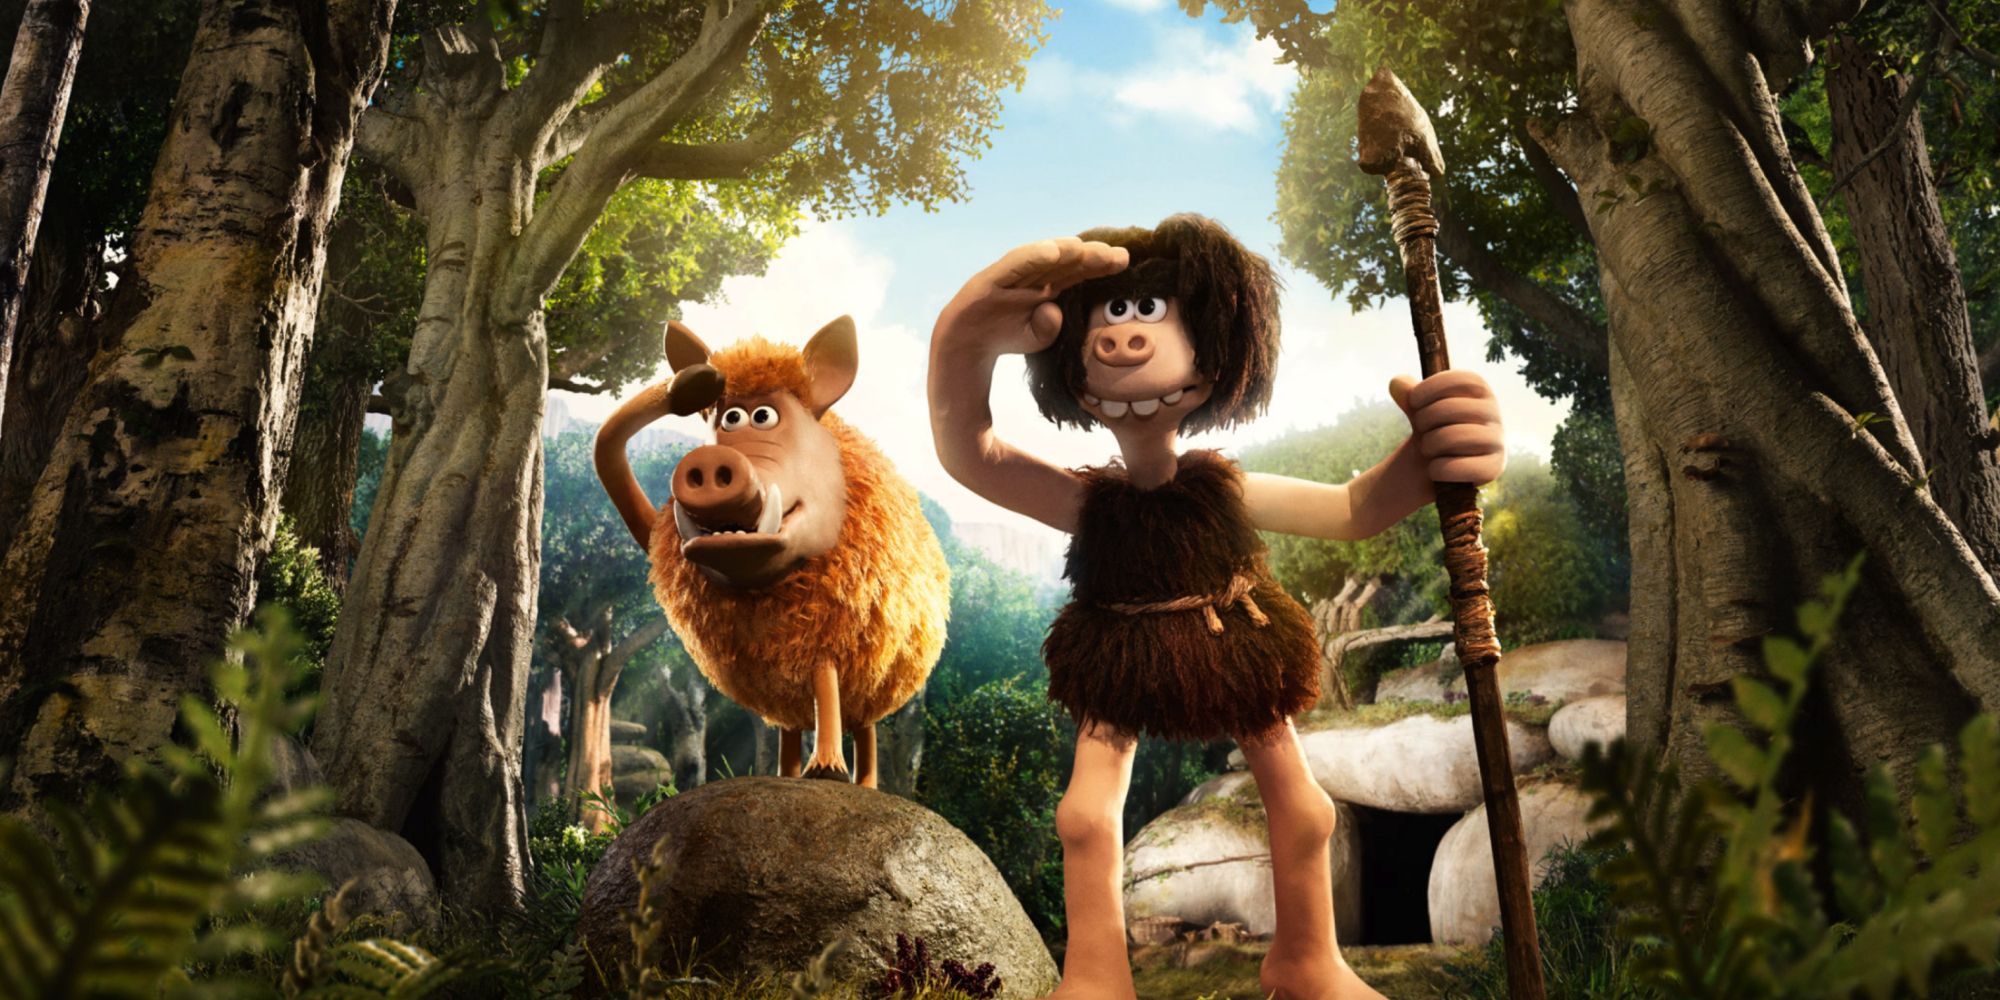 Still from animated film with board and caveman